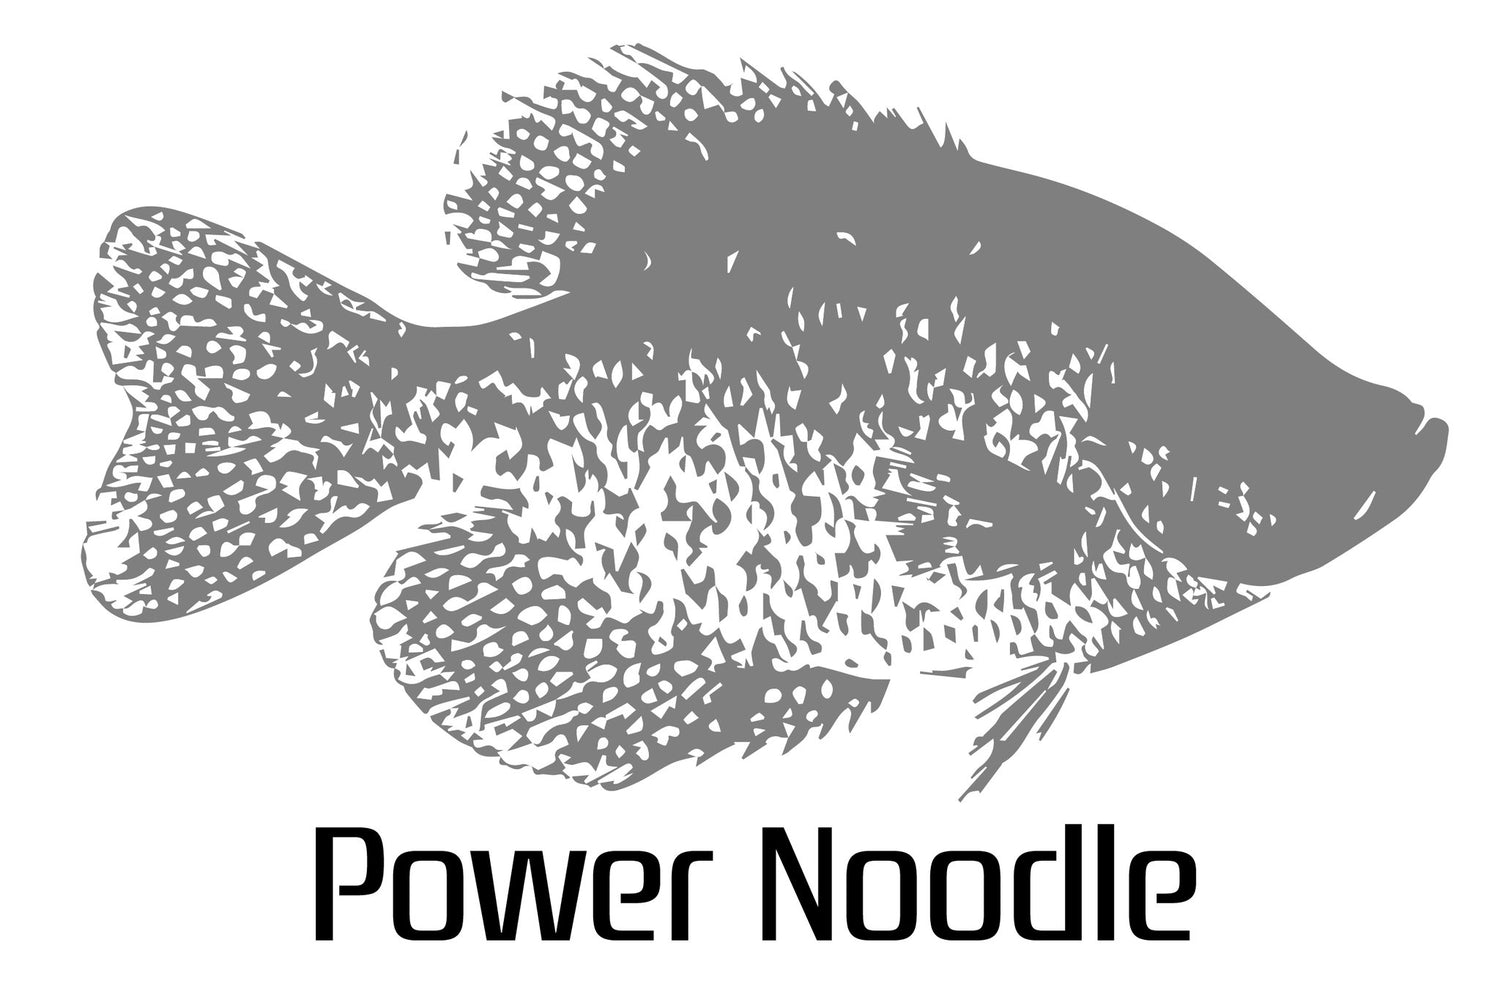 his power noodle is 6 years in the making.  Tried and true, the best ice rod blank for the money in the market today!  It boasts a massive 6.4mm butt moving very far up the blank in that same diameter to deliver the most power for the angler